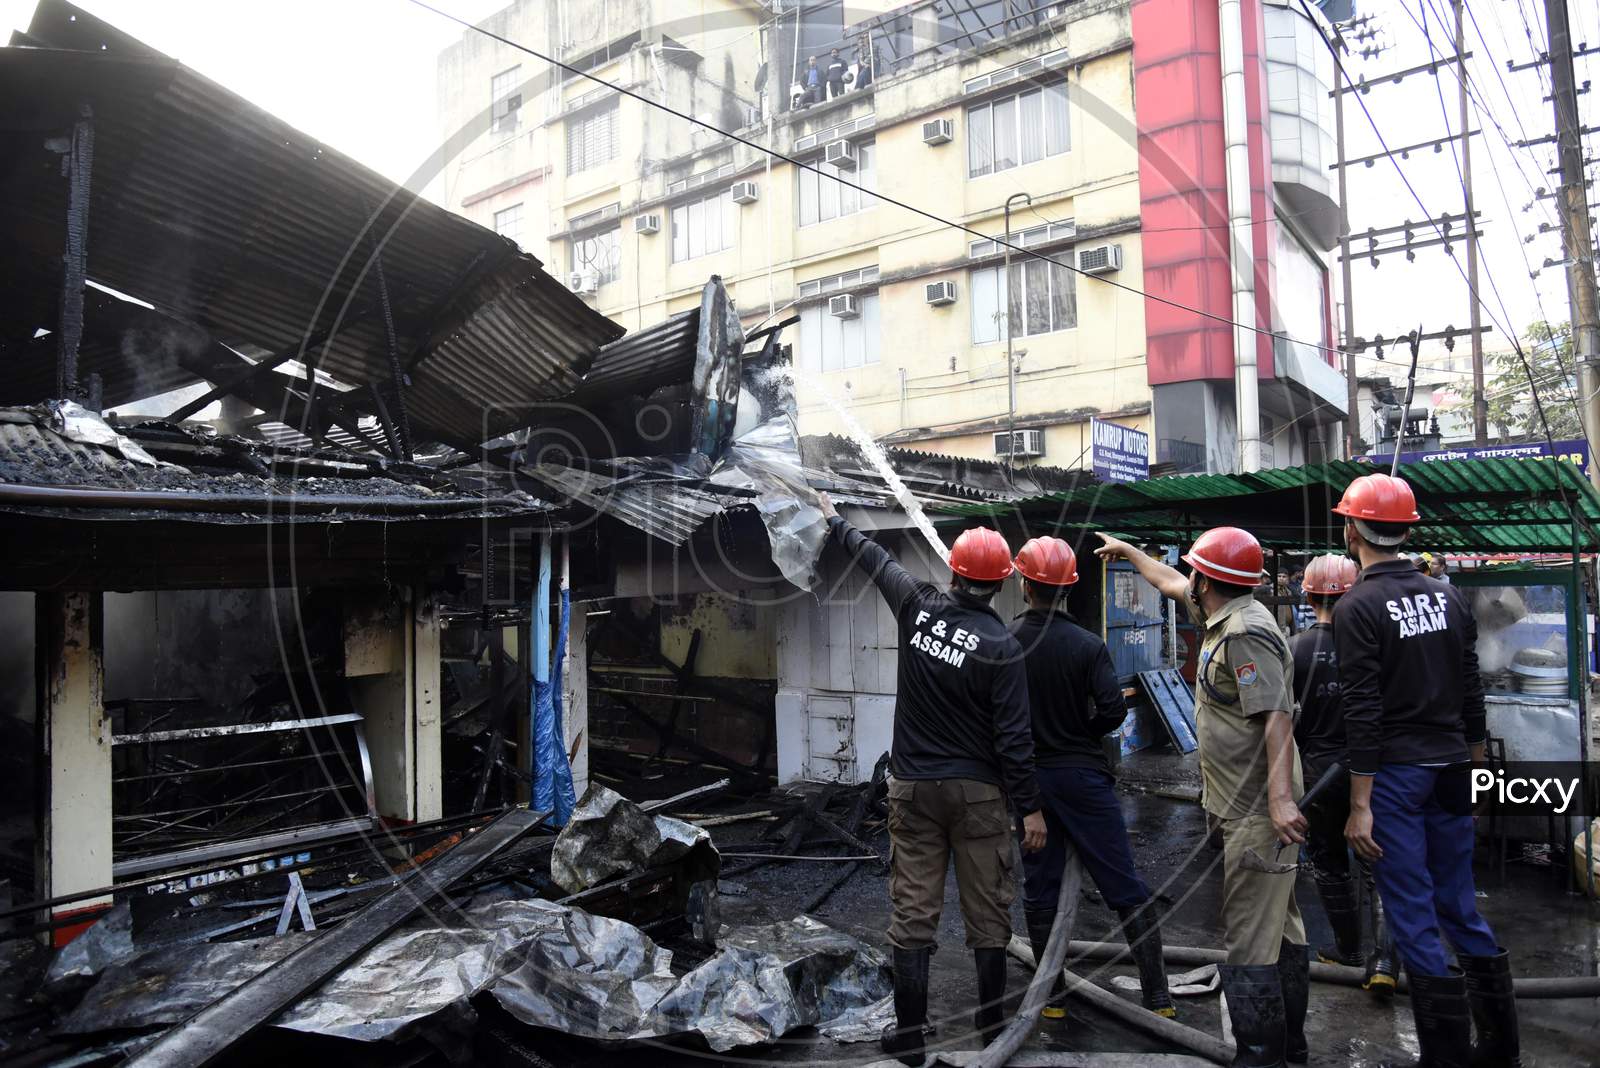 Fire Fighter Douse A Massive Fire After A Sweets Shop Catch Fire, At Bhangagarh In Guwahati